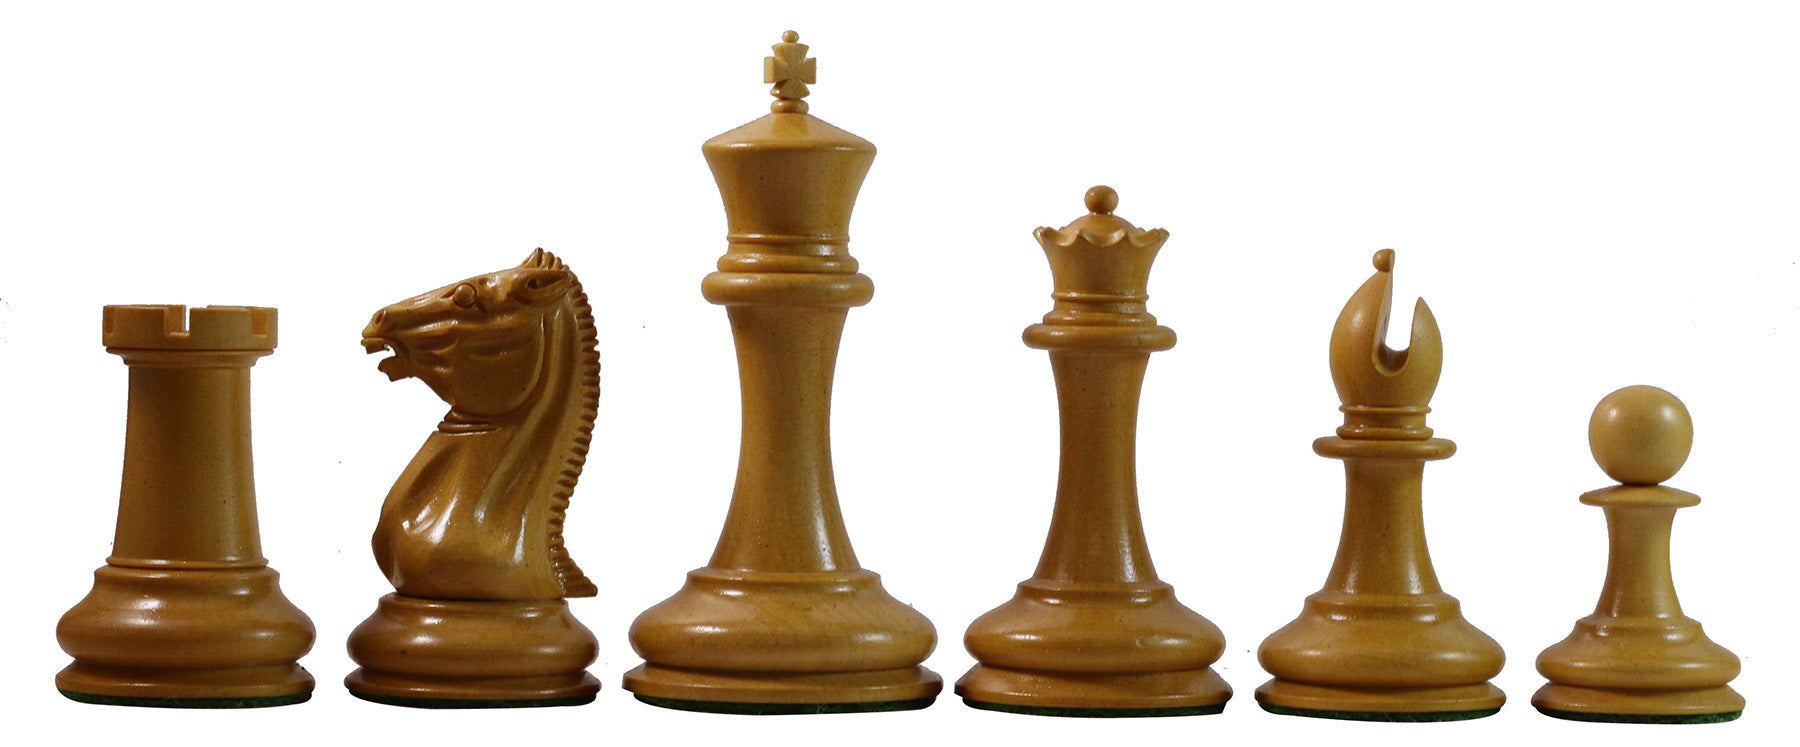 Morphy Cooke 1849-50 Vintage 3.5" Reproduction Chess Set in Antiqued Boxwood